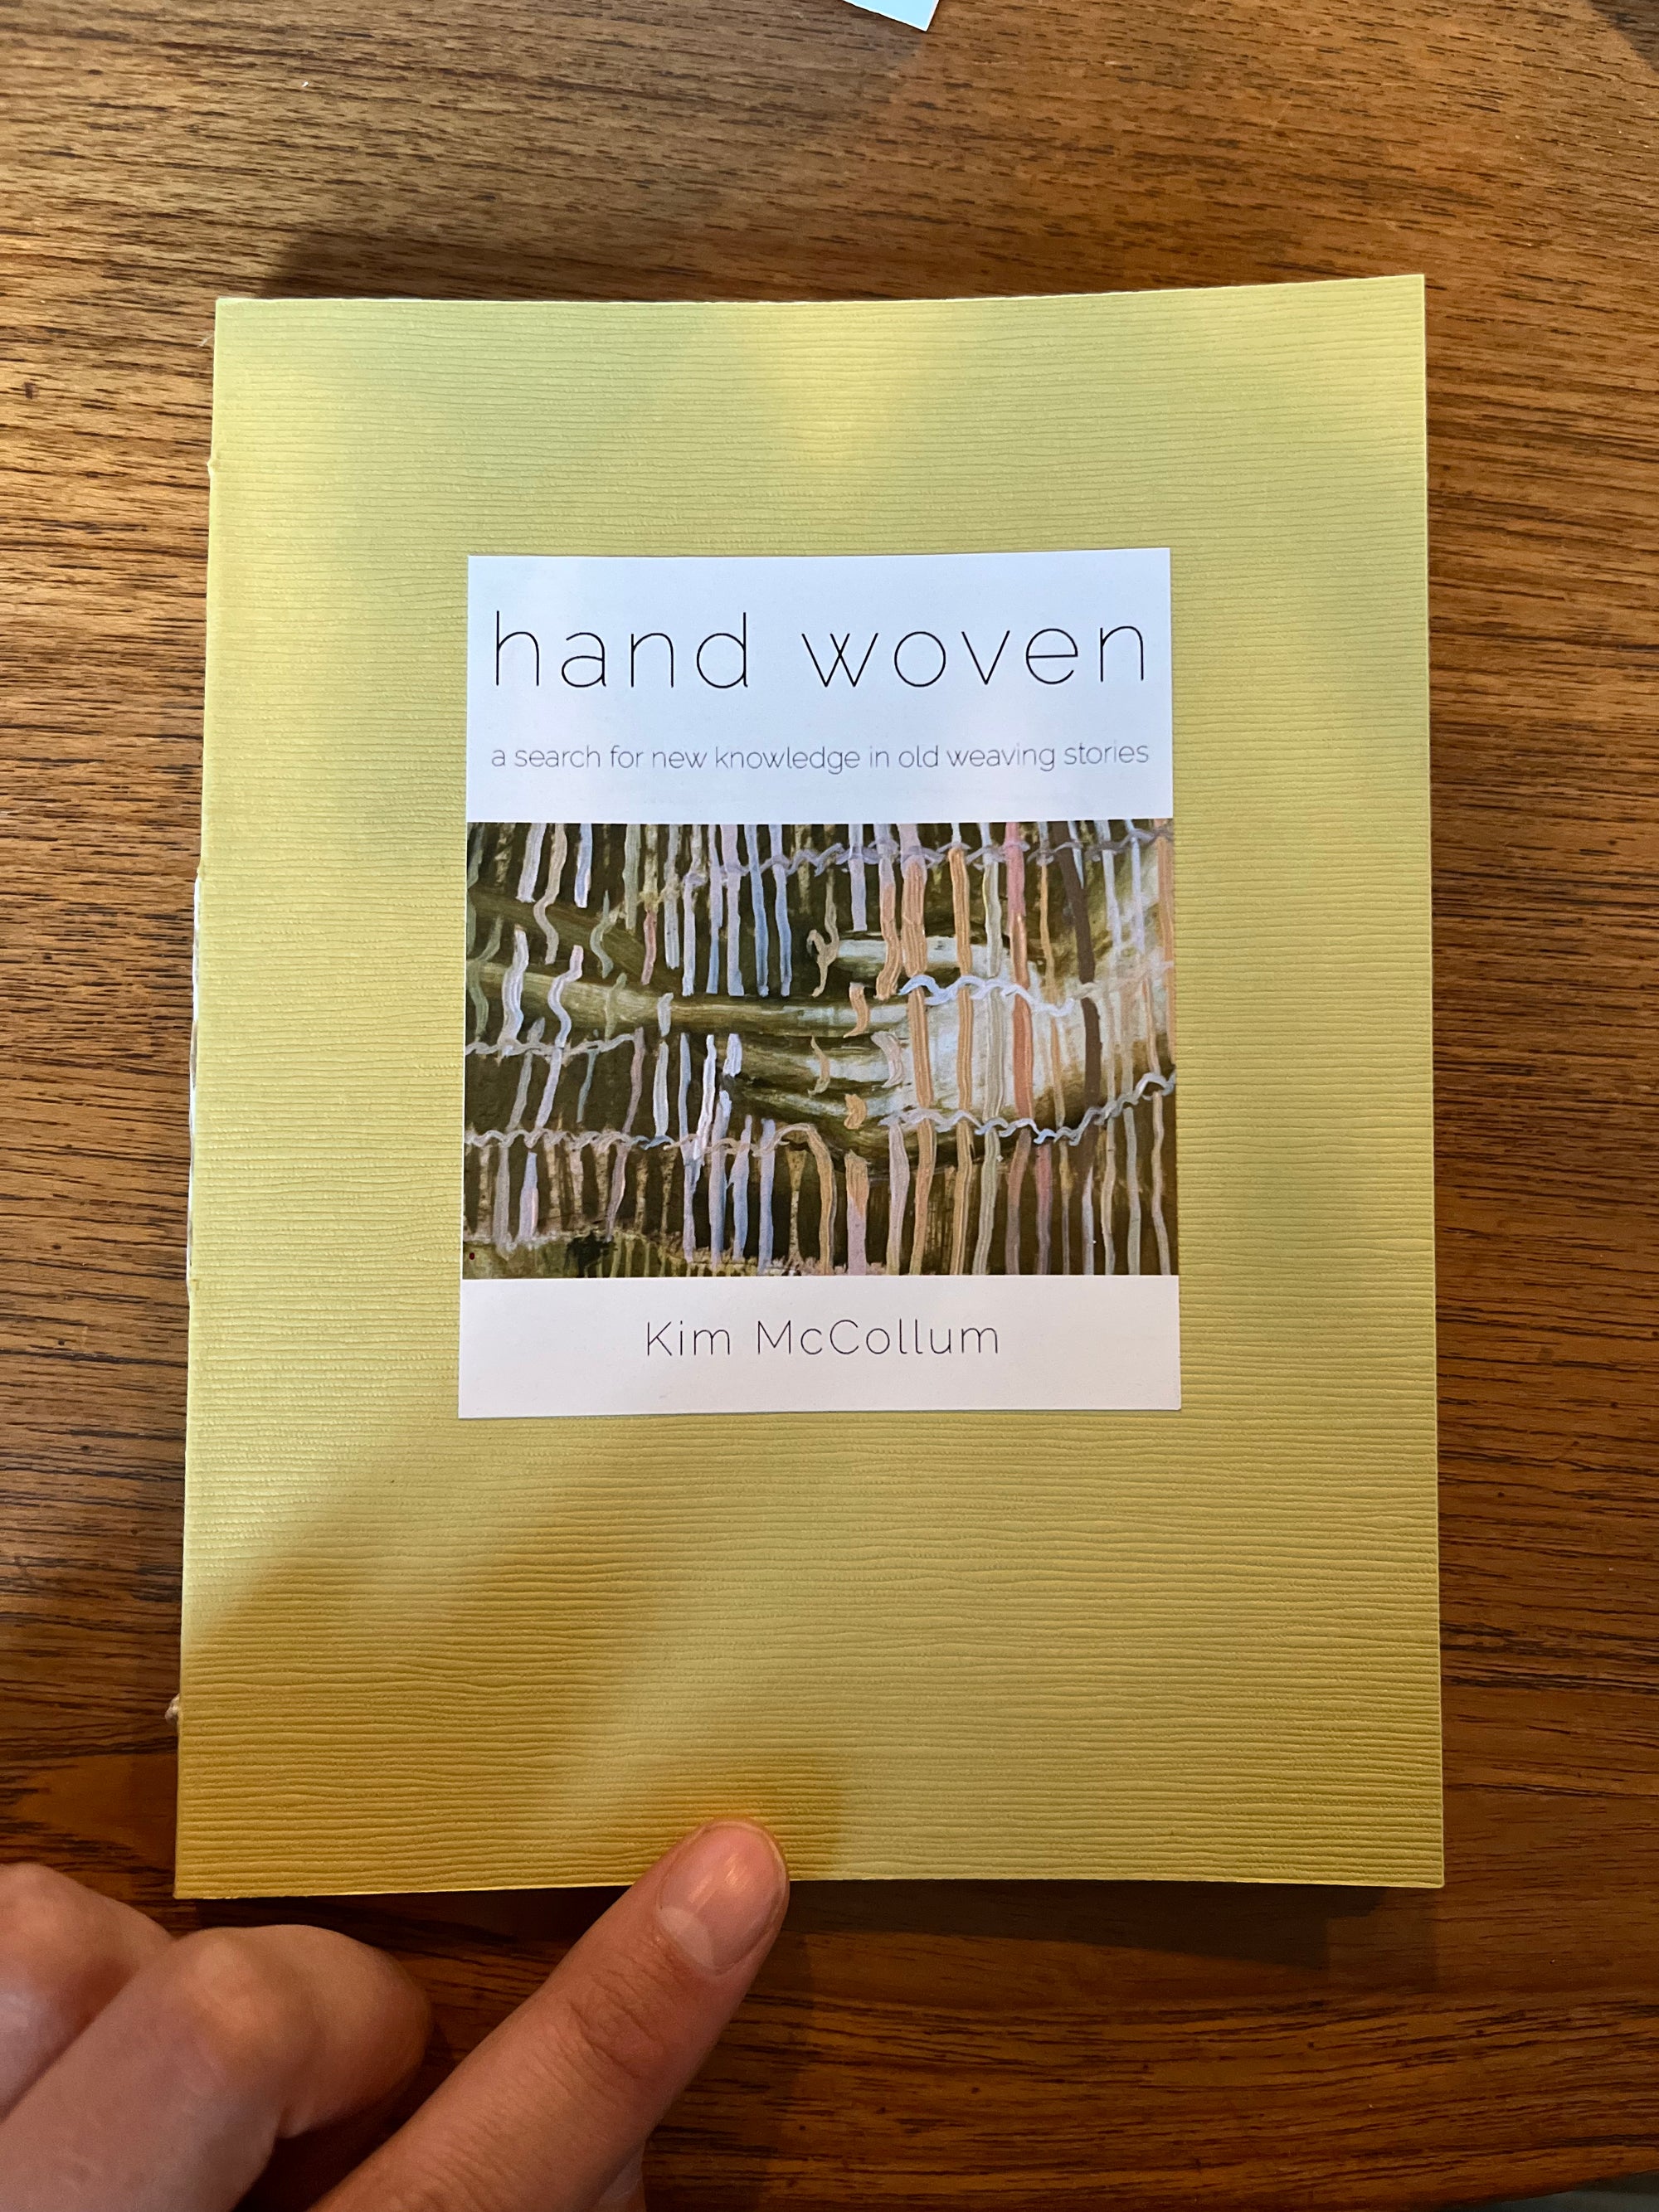 Hand Woven: A search for new knowledge in old weaving stories. By Kim McCollum